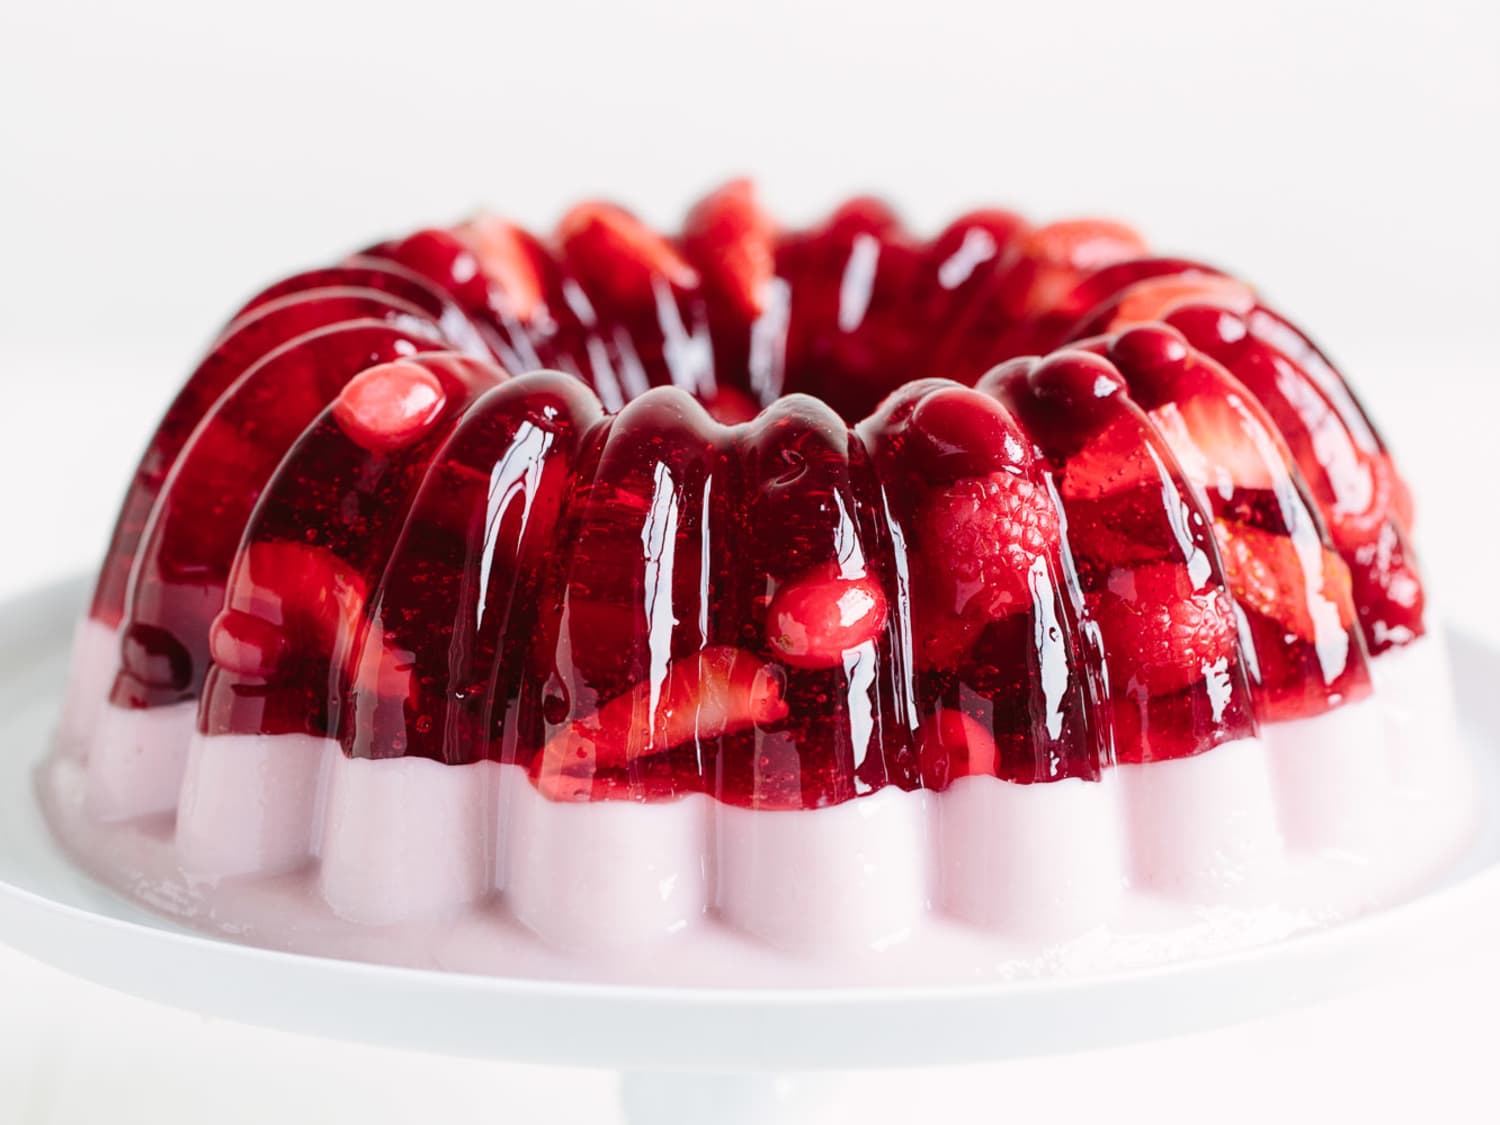 How To Make a Layered Jello Mold